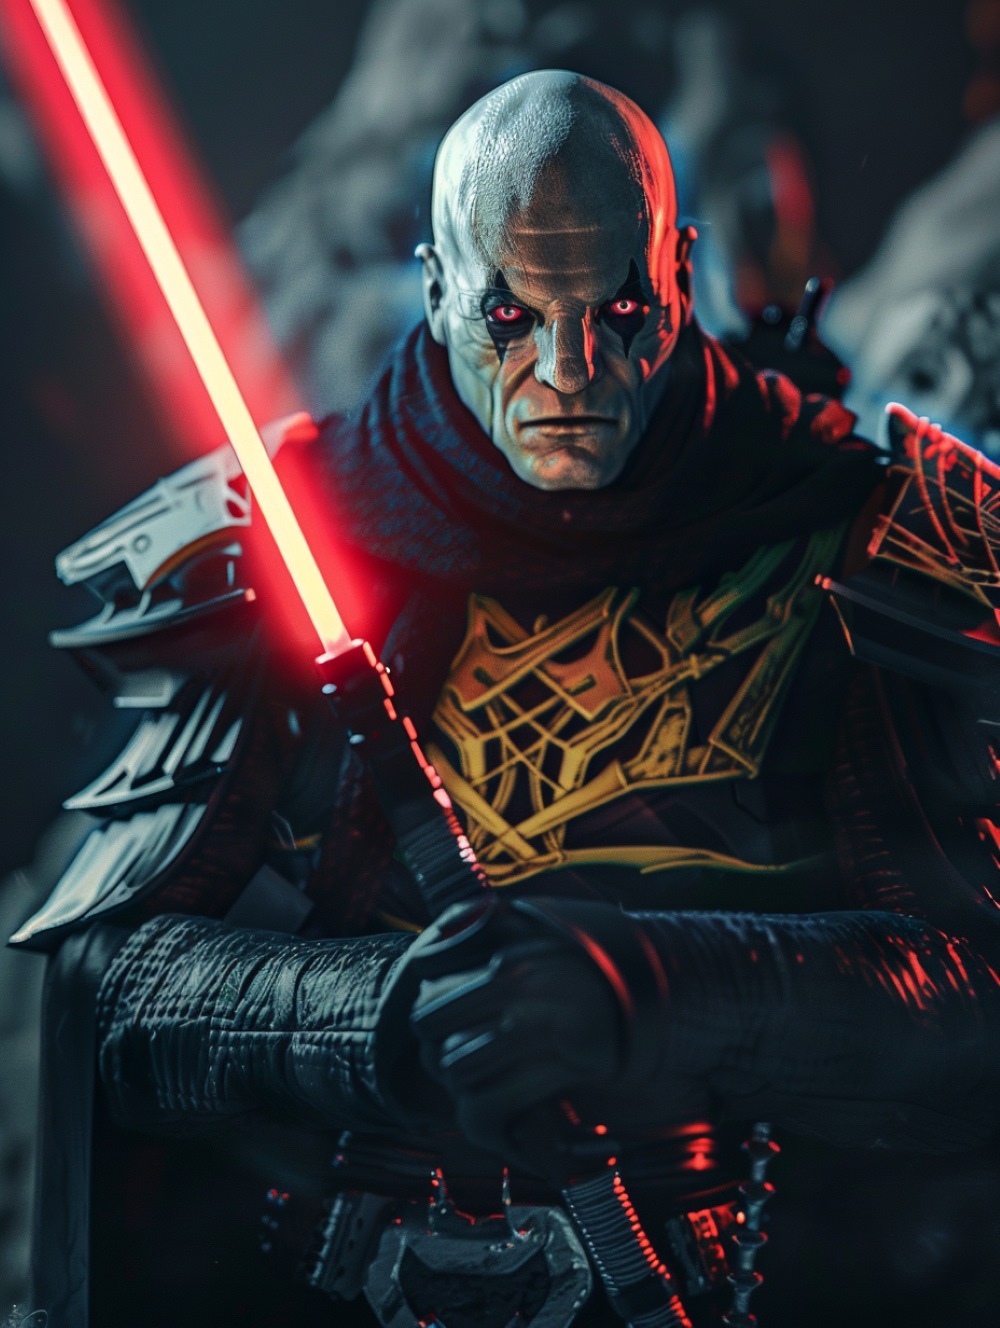 Darth Bane is holding his red lightsaber